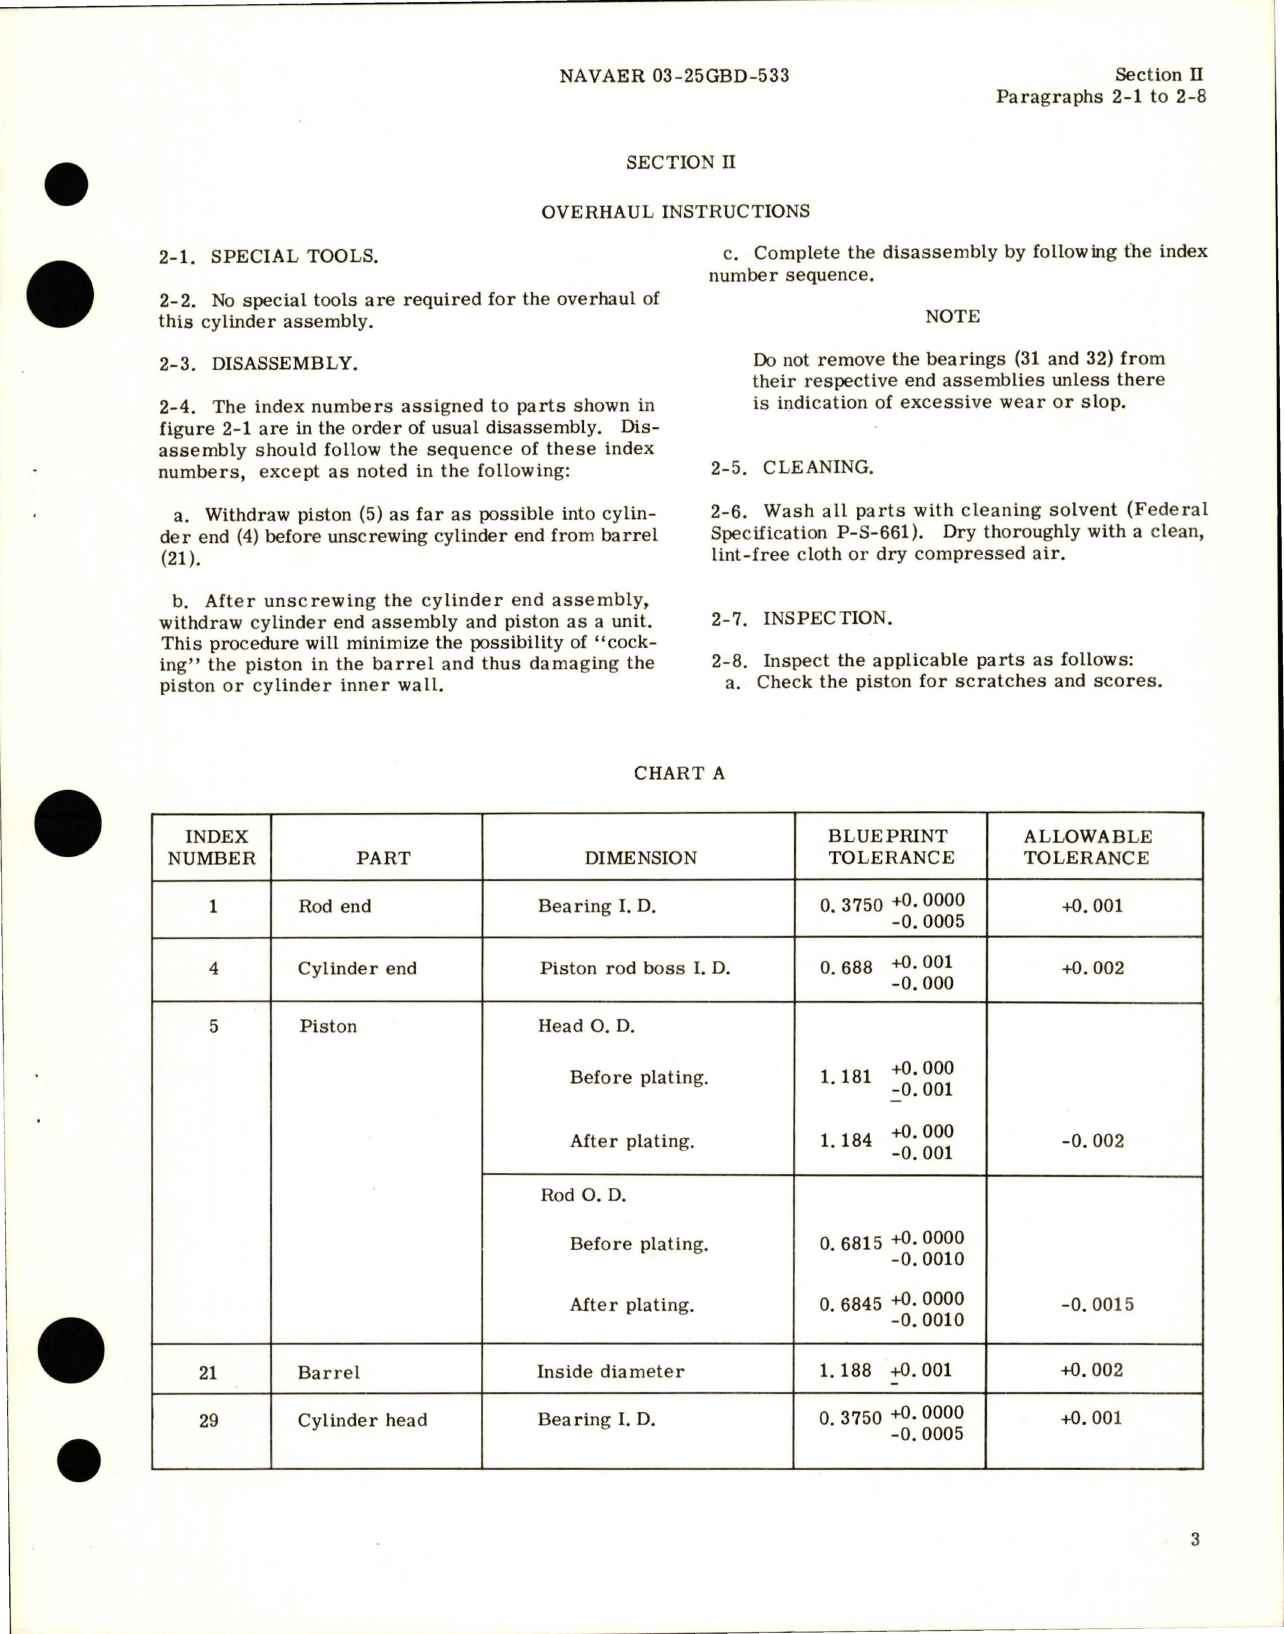 Sample page 5 from AirCorps Library document: Overhaul Instructions for Main Alighting Gear Fairing Door Operating Cylinder Assembly - Parts 181-58034-1 and 181-58034-2 